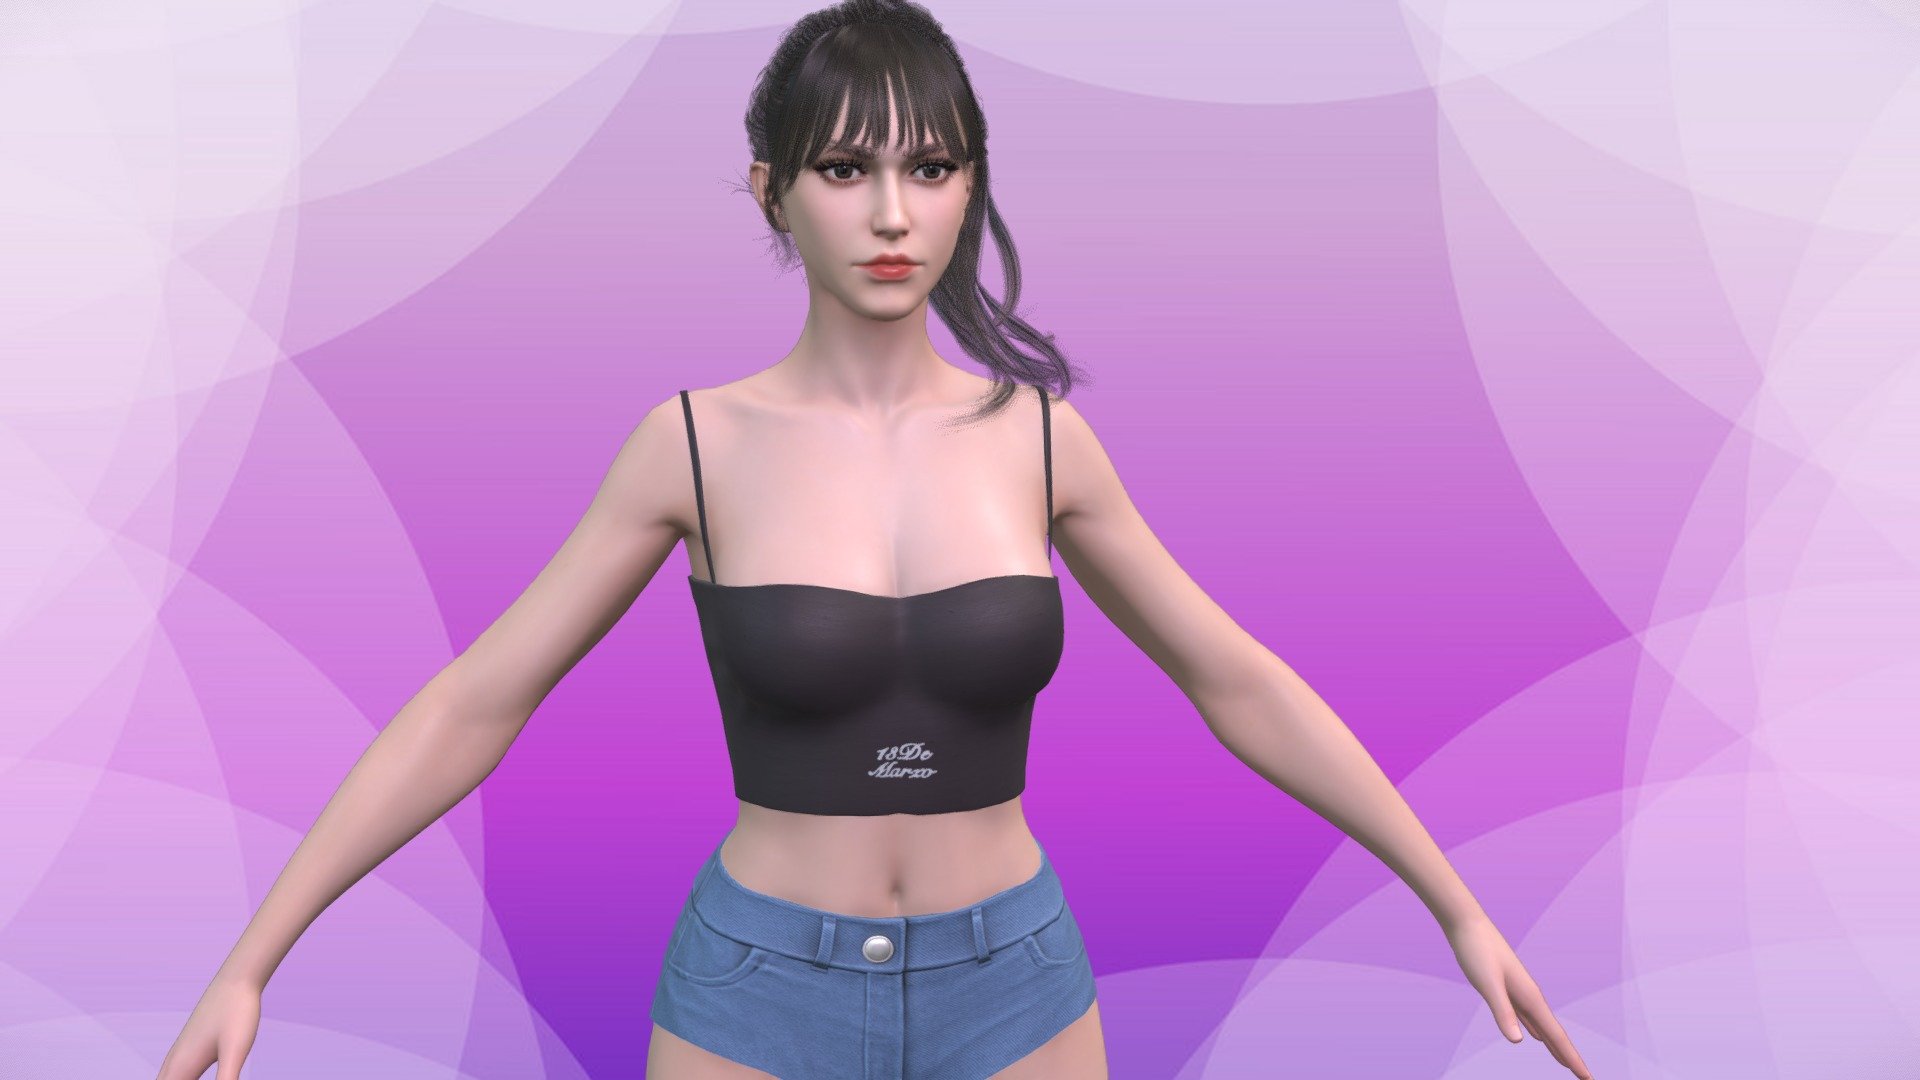 -Product name: Young Fashion woman wear tops and short jeans GameAssets

+Low poly, game ready, unrigged, PBR textures. Include nude body mesh.

Basemesh Highpoly mesh zbrush ztl file included.Only basemsh,cloth not included.

+2body versions: Full Clothes,Full Nude.

161144 tris.

Maya version：2016

mb FBX OBJ DAE ztl format fles included.

PBR Texture size ：Basemesh 4096*4096 tga format.OpenGL Normal map.Cloth:2048 tga format.OpenGL Normal map

The product please visit(NUDE PHOTO):https://www.artstation.com/a/23745461       Preview images is captured Marmoset toolbag 4.

Enjoy~ - Fashion Woman Tops And Short Jeans Game A - Buy Royalty Free 3D model by Vincent Page (@vincentpage) 3d model